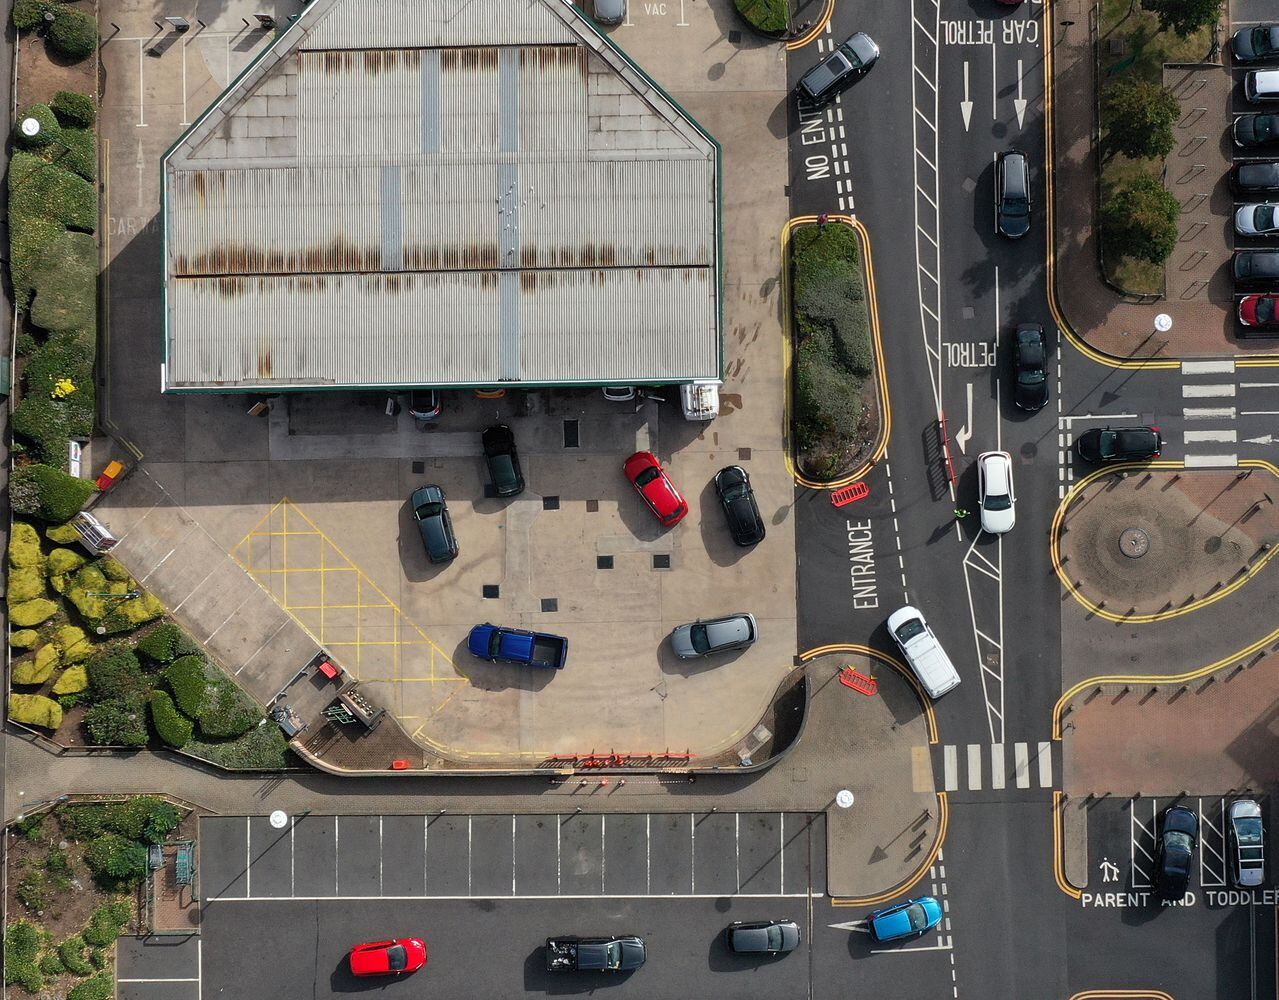 An aerial view shows motorists queueing at a petrol station in Coventry, central England on September 28, 2021. - The UK government today faced calls for nurses, police, teachers and other key workers to be given priority at petrol pumps, as the army was put on standby to ease a fuel supply crisis. (Photo by Paul ELLIS / AFP)